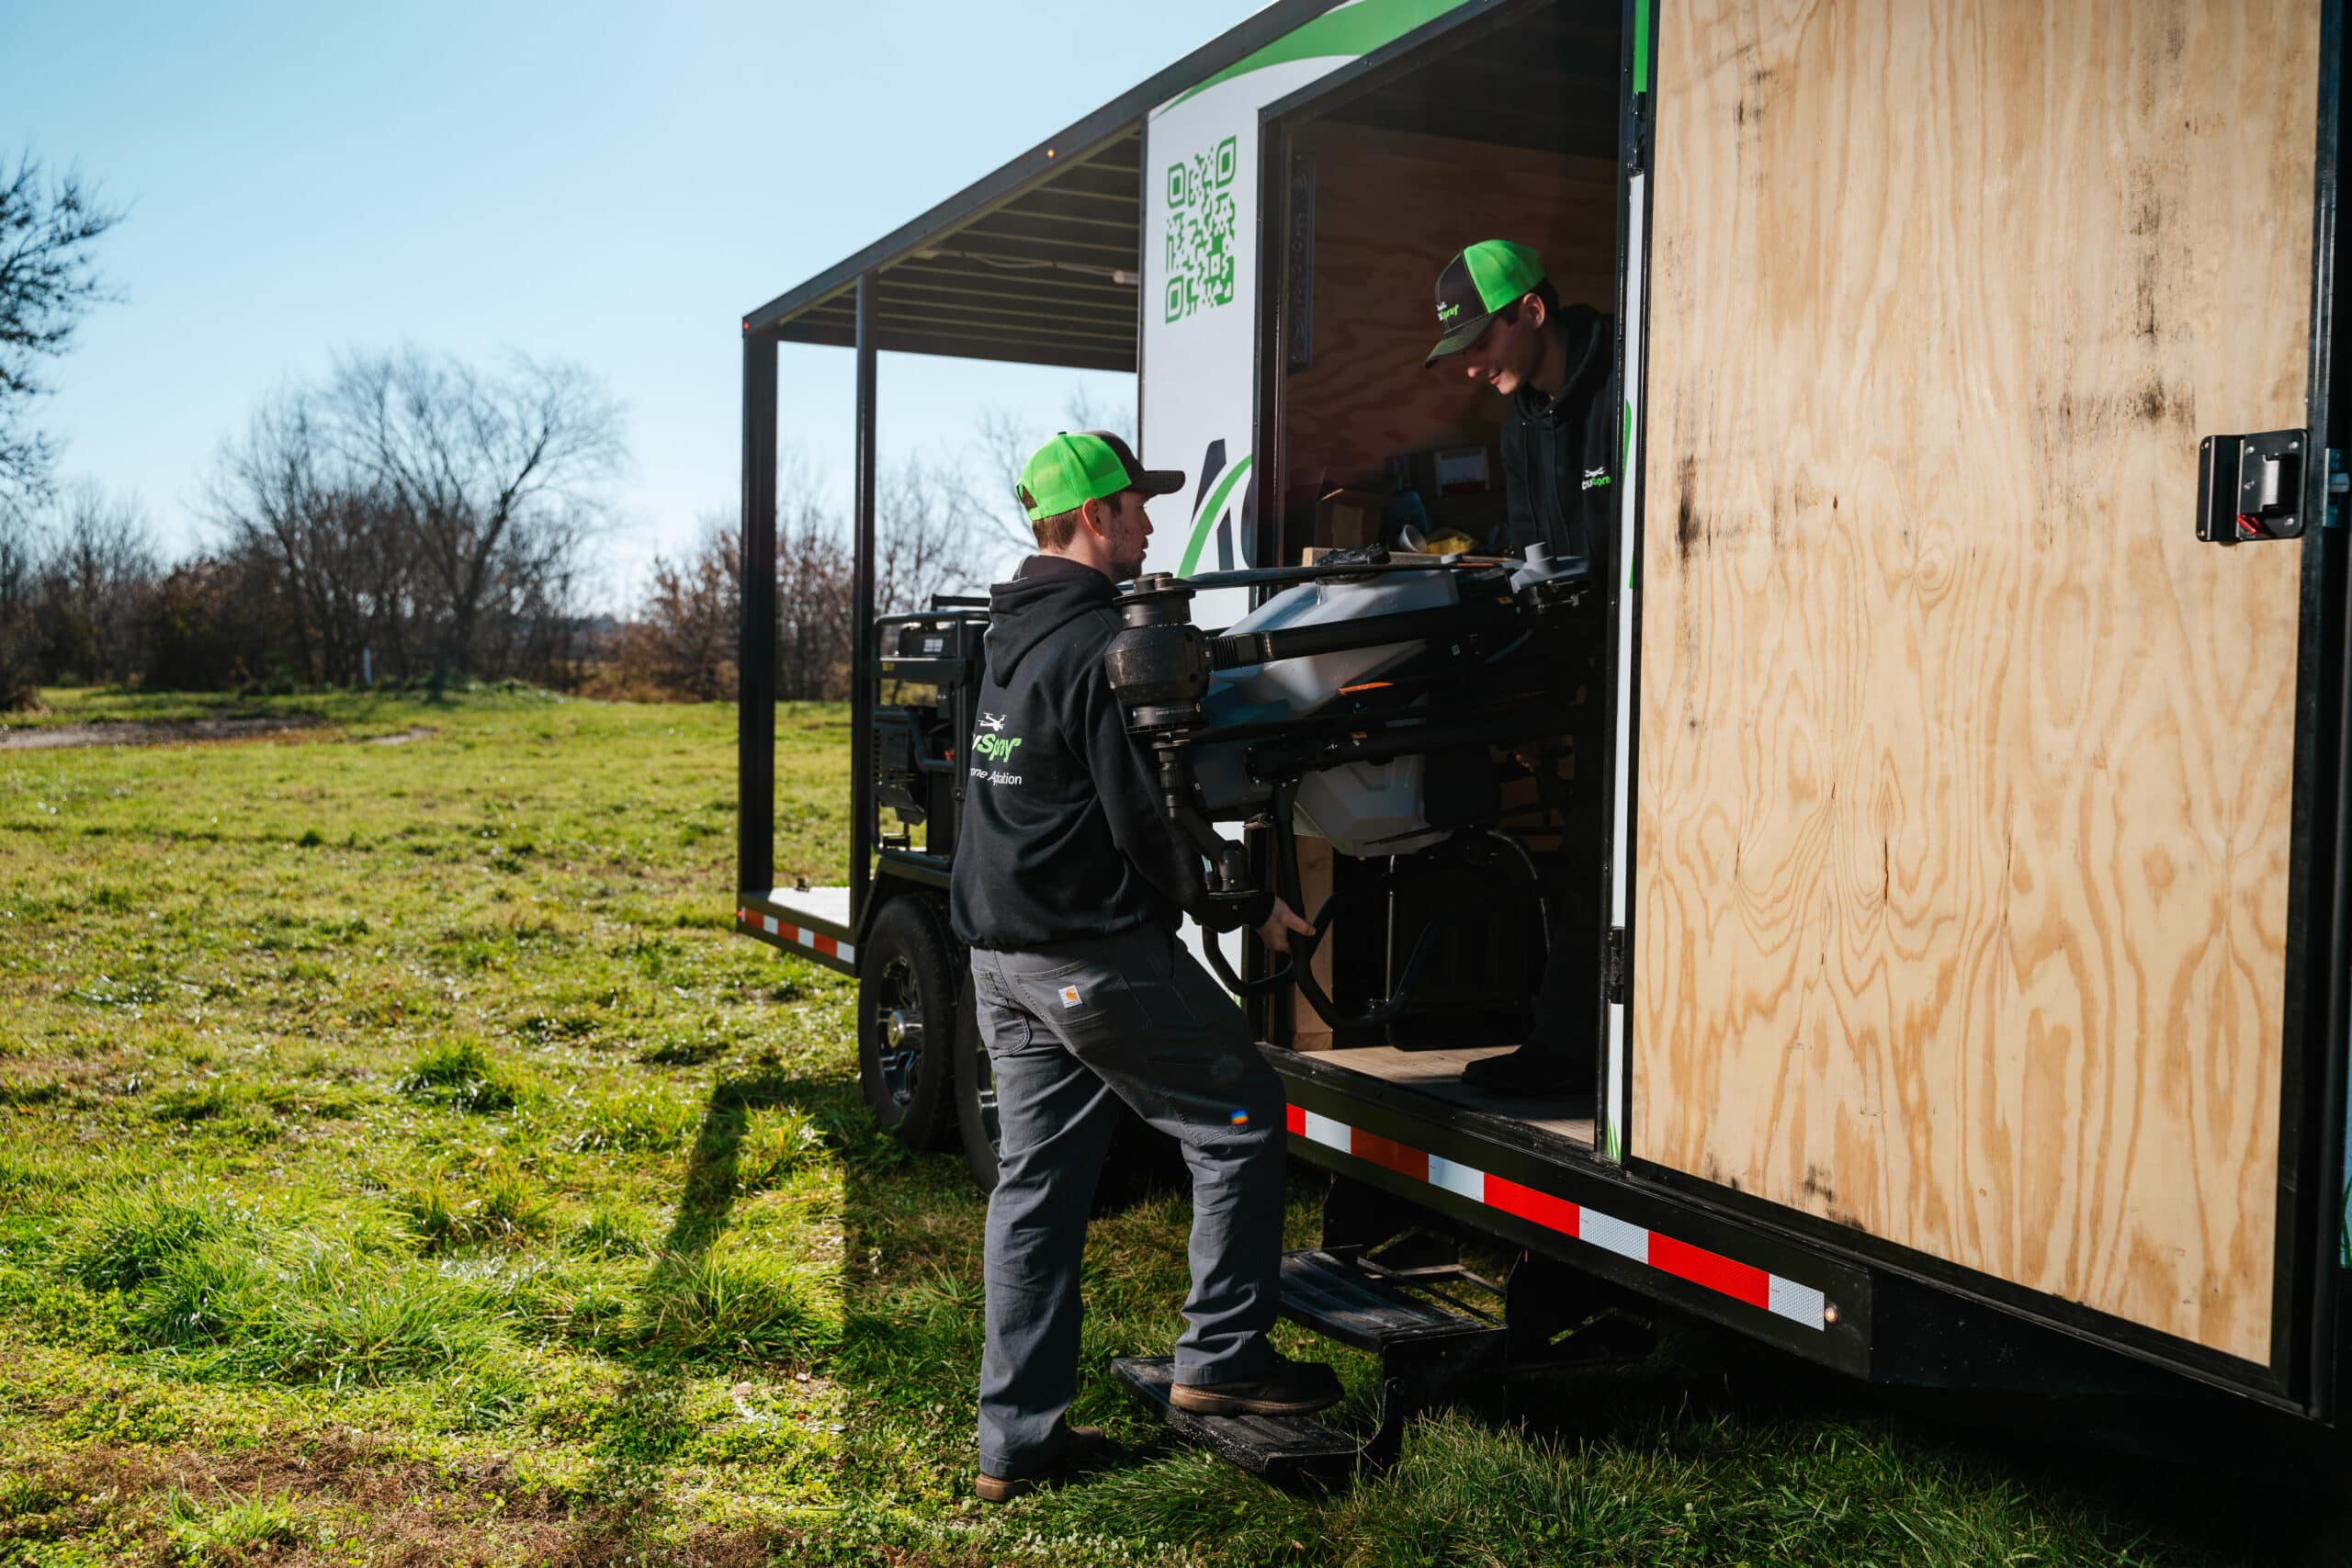 Two technicians in green caps and black jackets operating a drone from a mobile trailer workstation in a field.